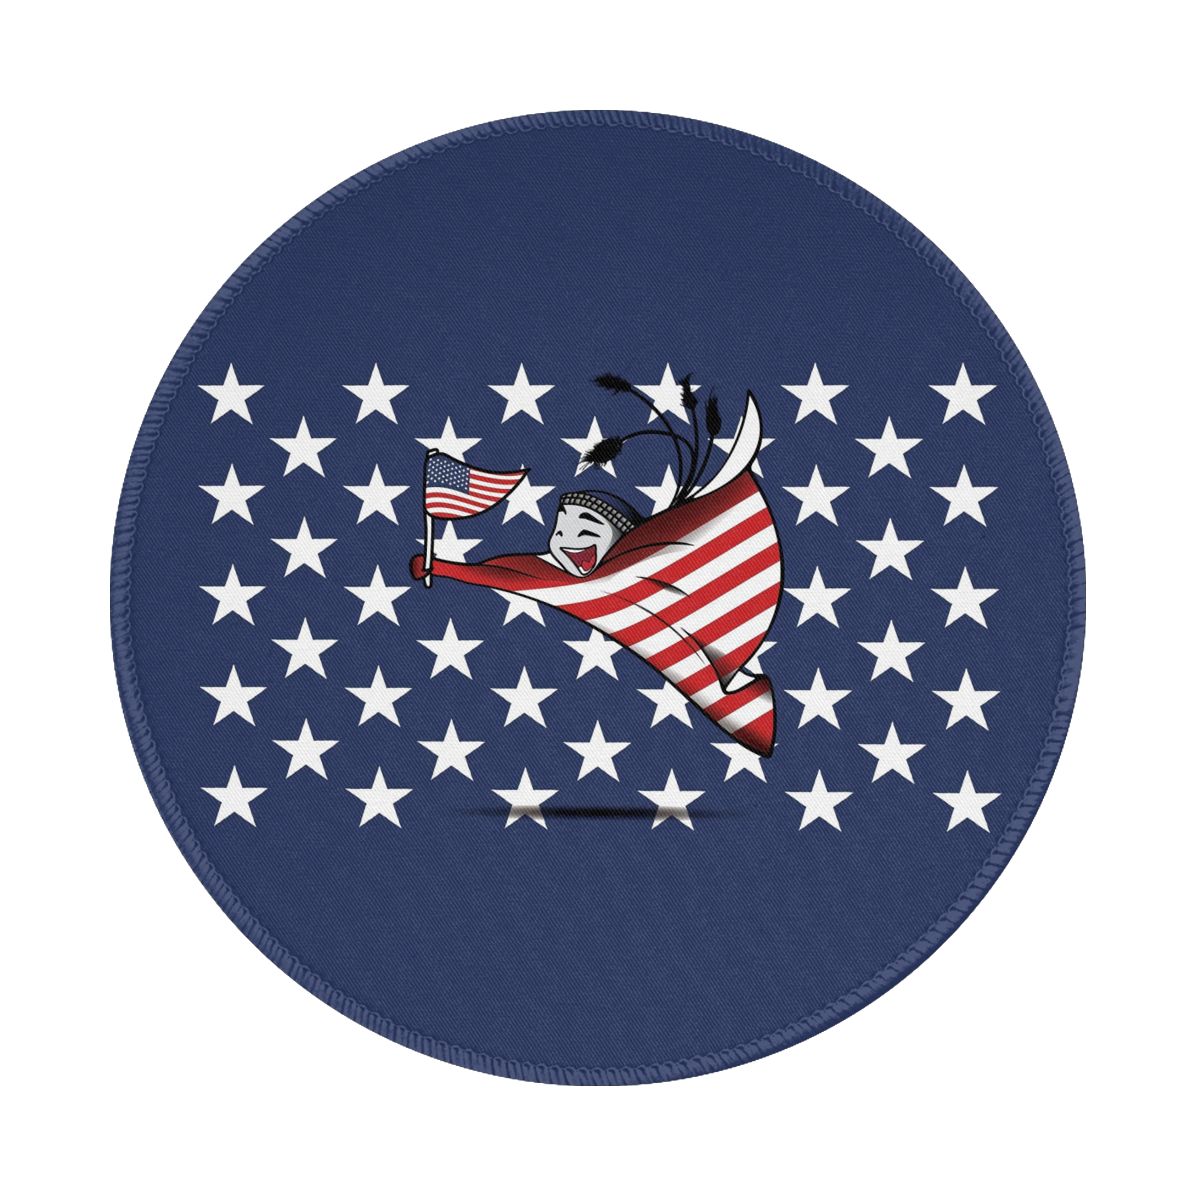 United States World Cup 2022 Mascot Waterproof Round Mouse Pad for Wireless Mouse